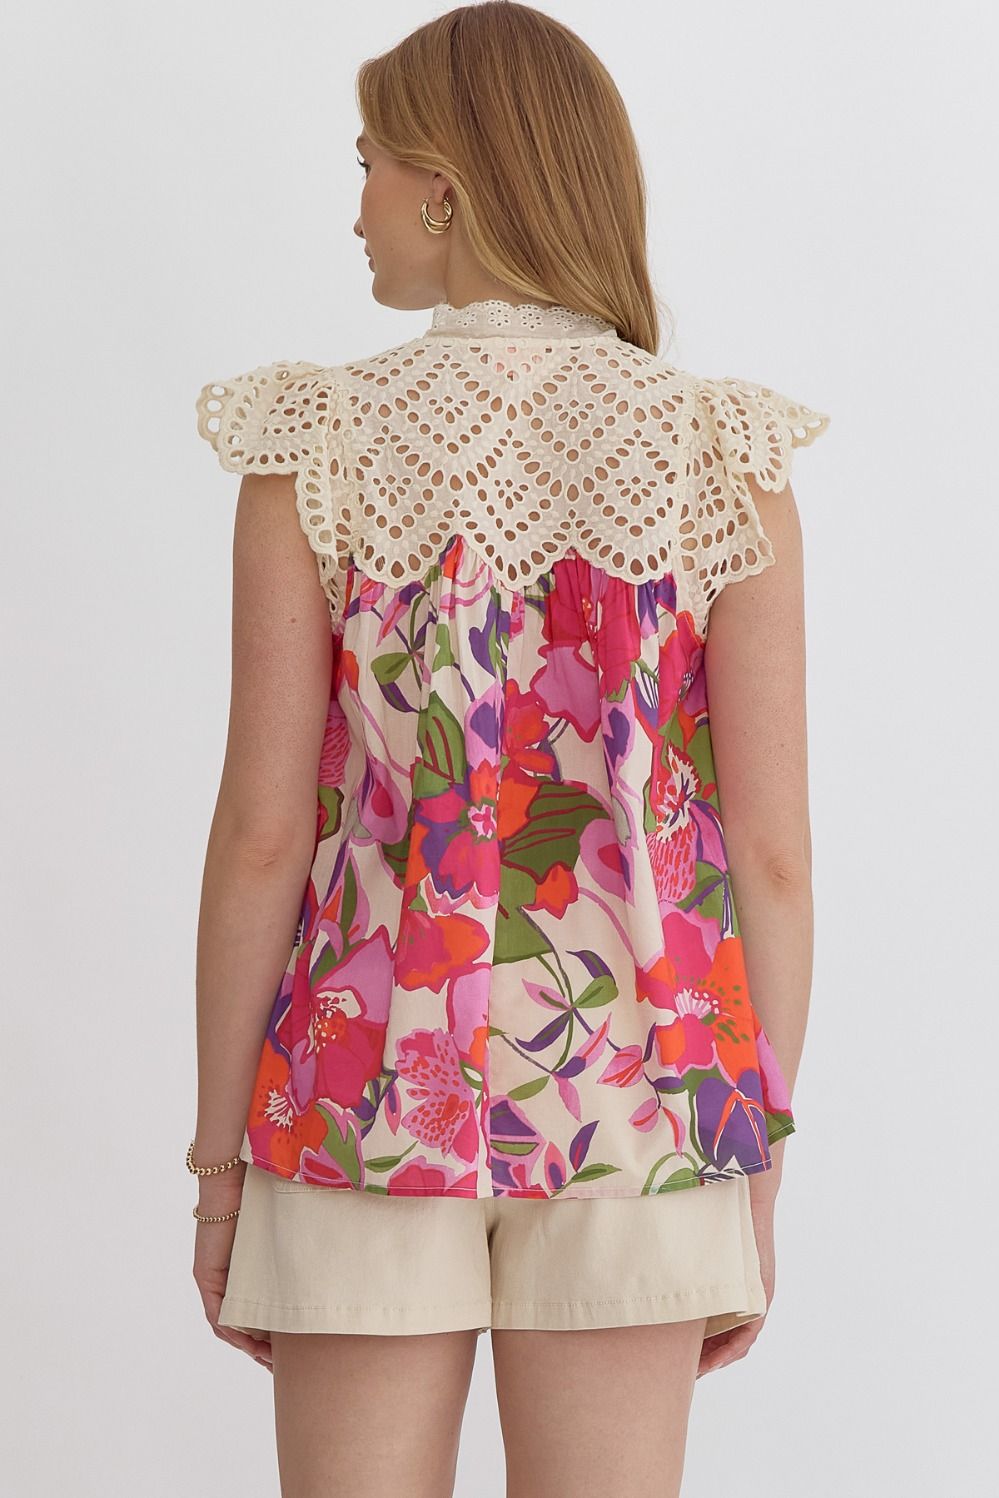 Eyelet and Floral Top